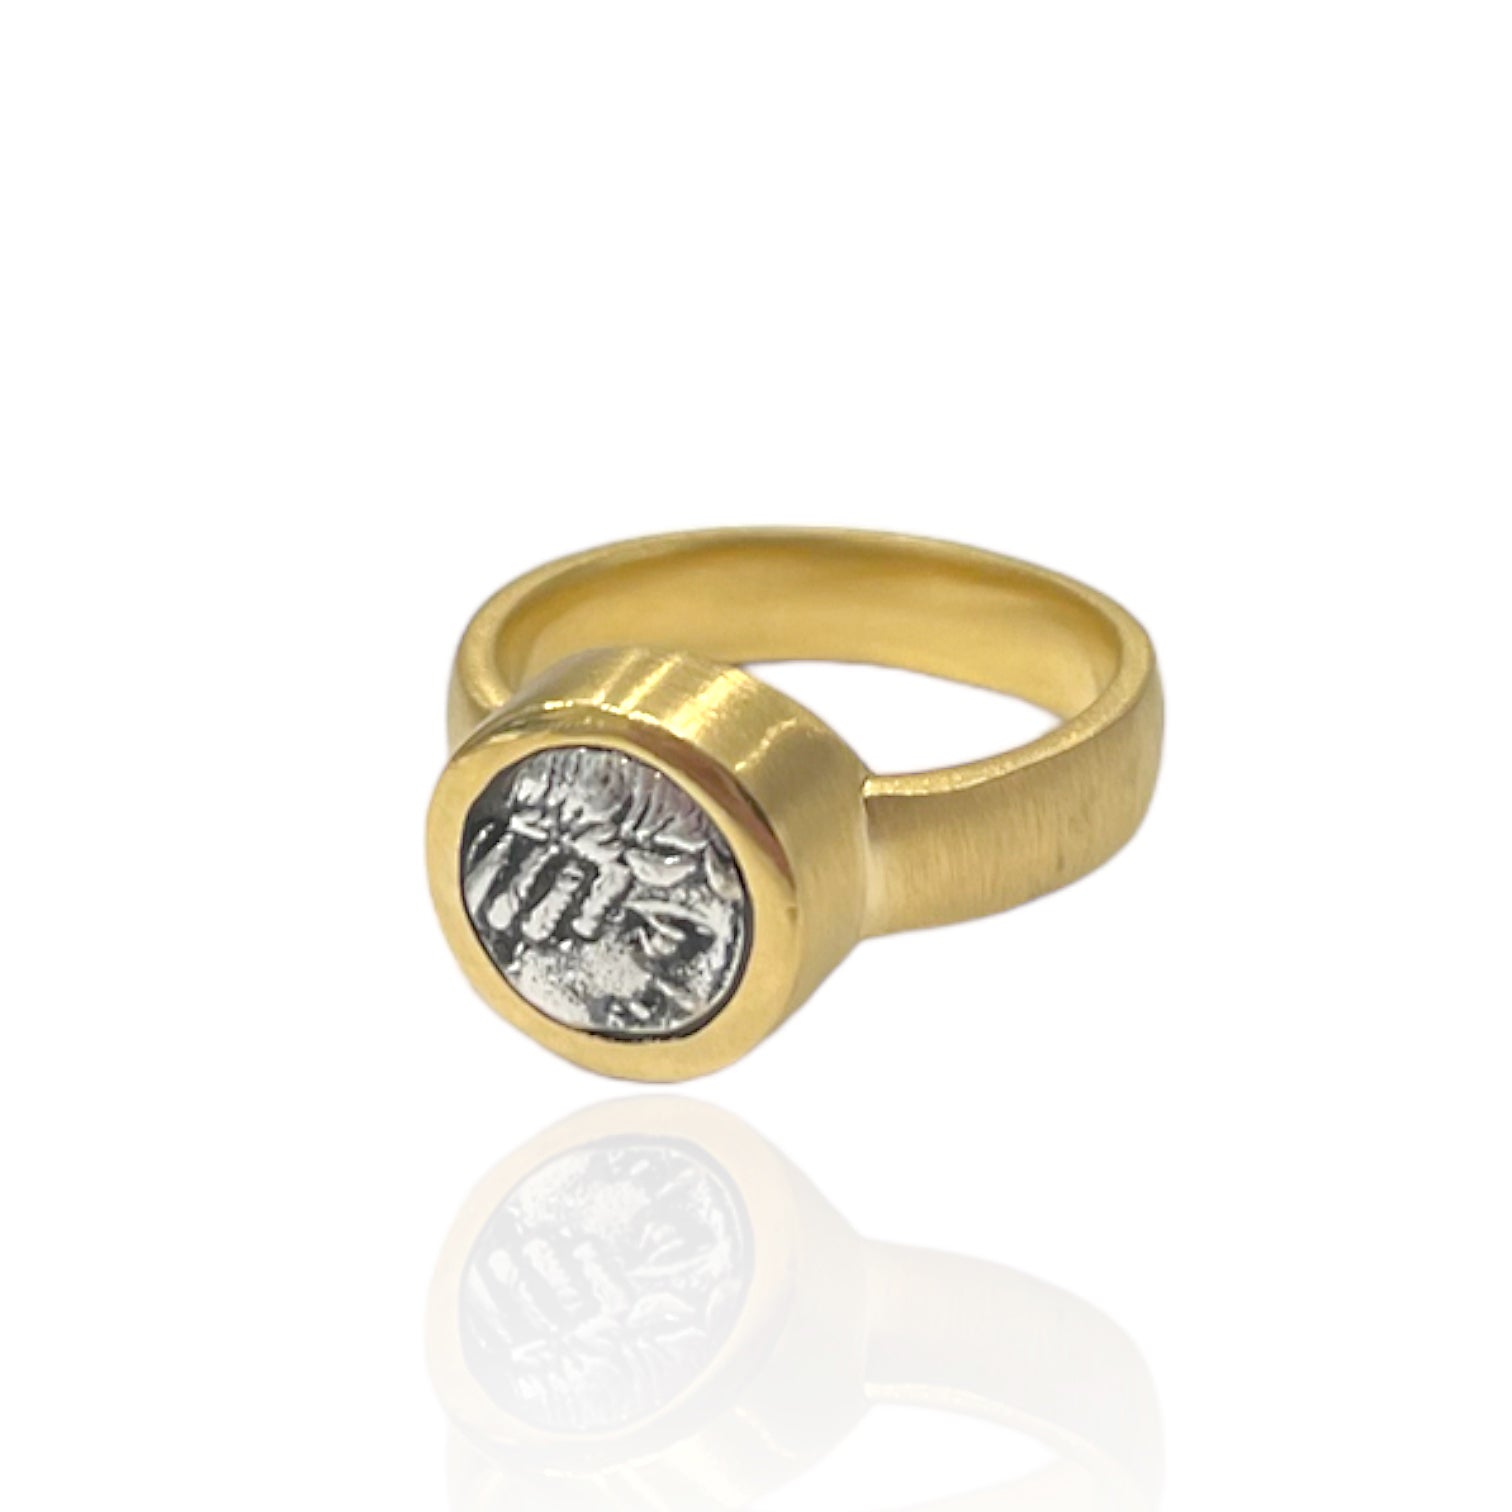 GOLD FLORA COIN RING